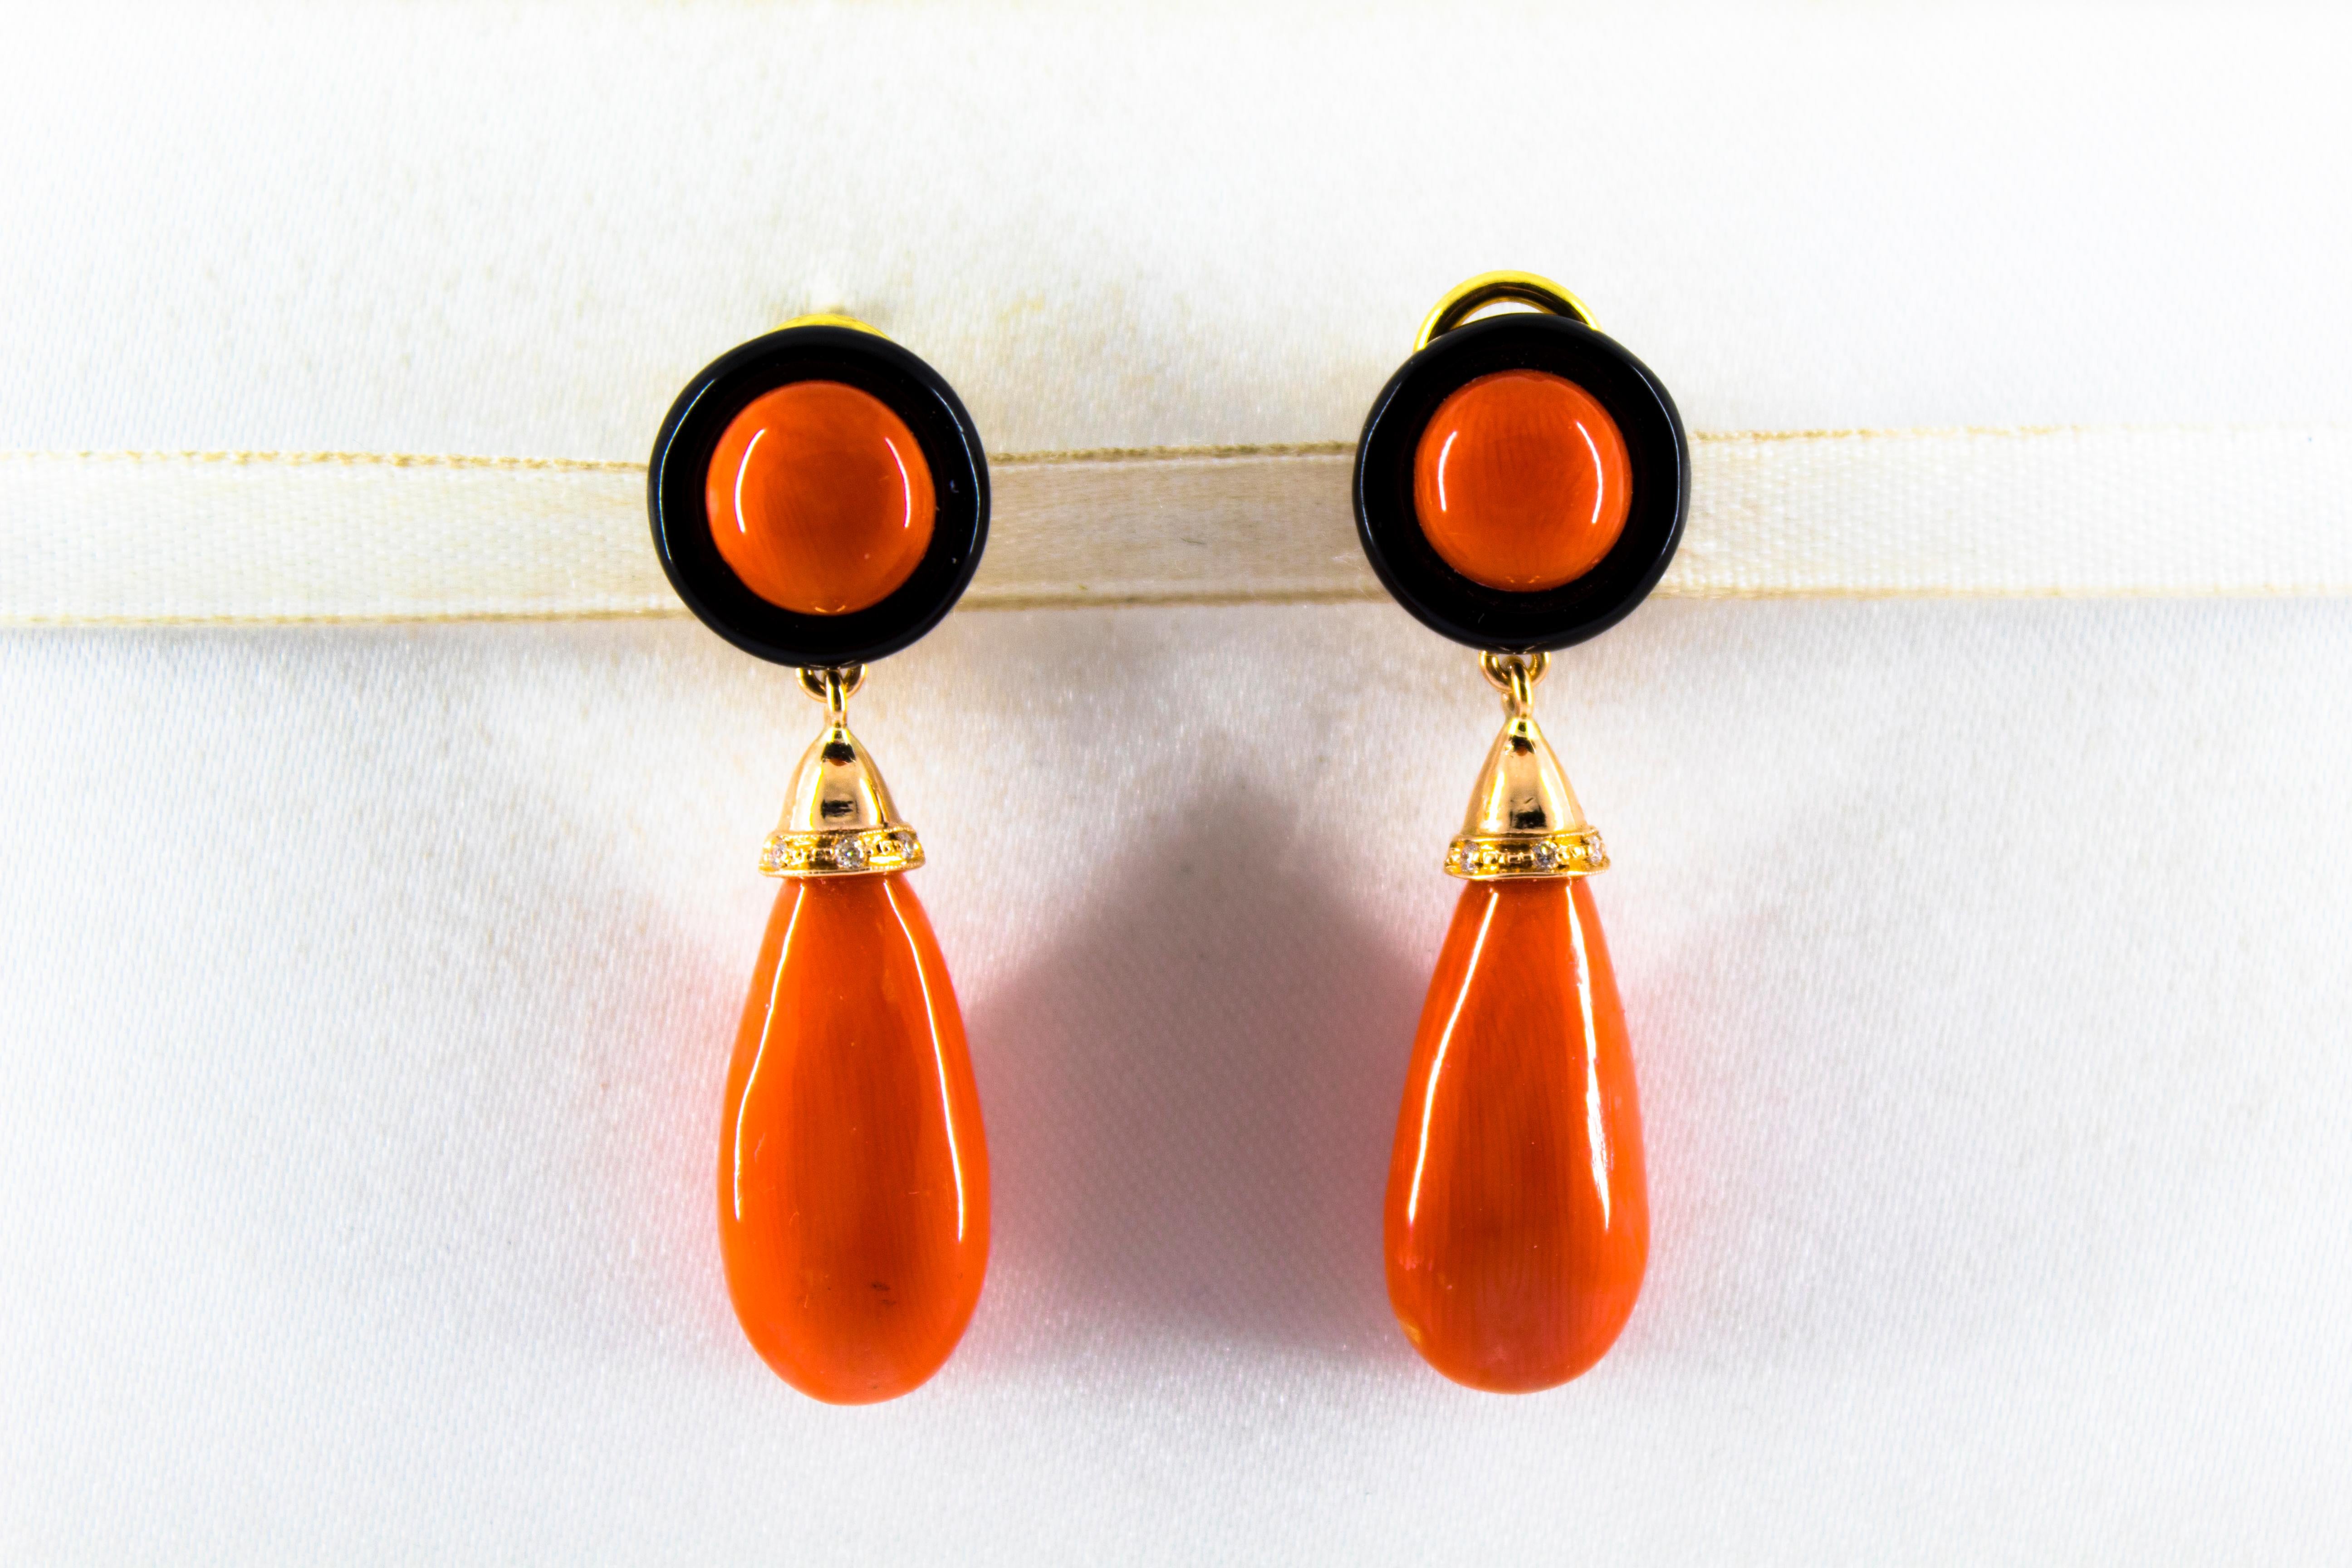 These Clip-On Earrings are made of 14K Yellow Gold with 18K Yellow Gold Clips.
These Earrings have 0.05 Carats of White Diamonds.
These Earrings have Red Mediterranean (Sardinia, Italy) Coral.
These Earrings have also Onyx.
All our Earrings have